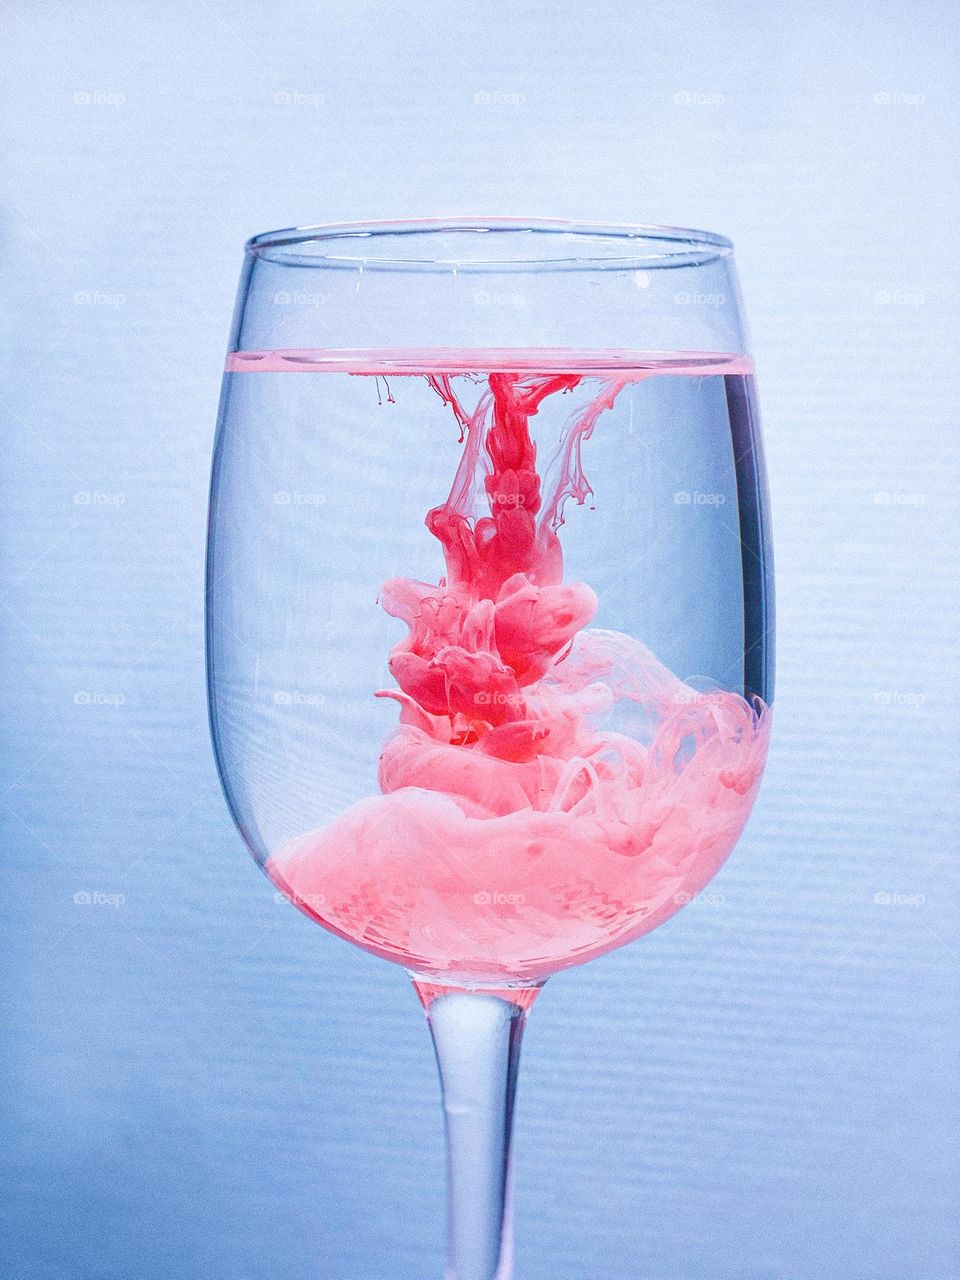 Mixes in the glass liquid pink and blue